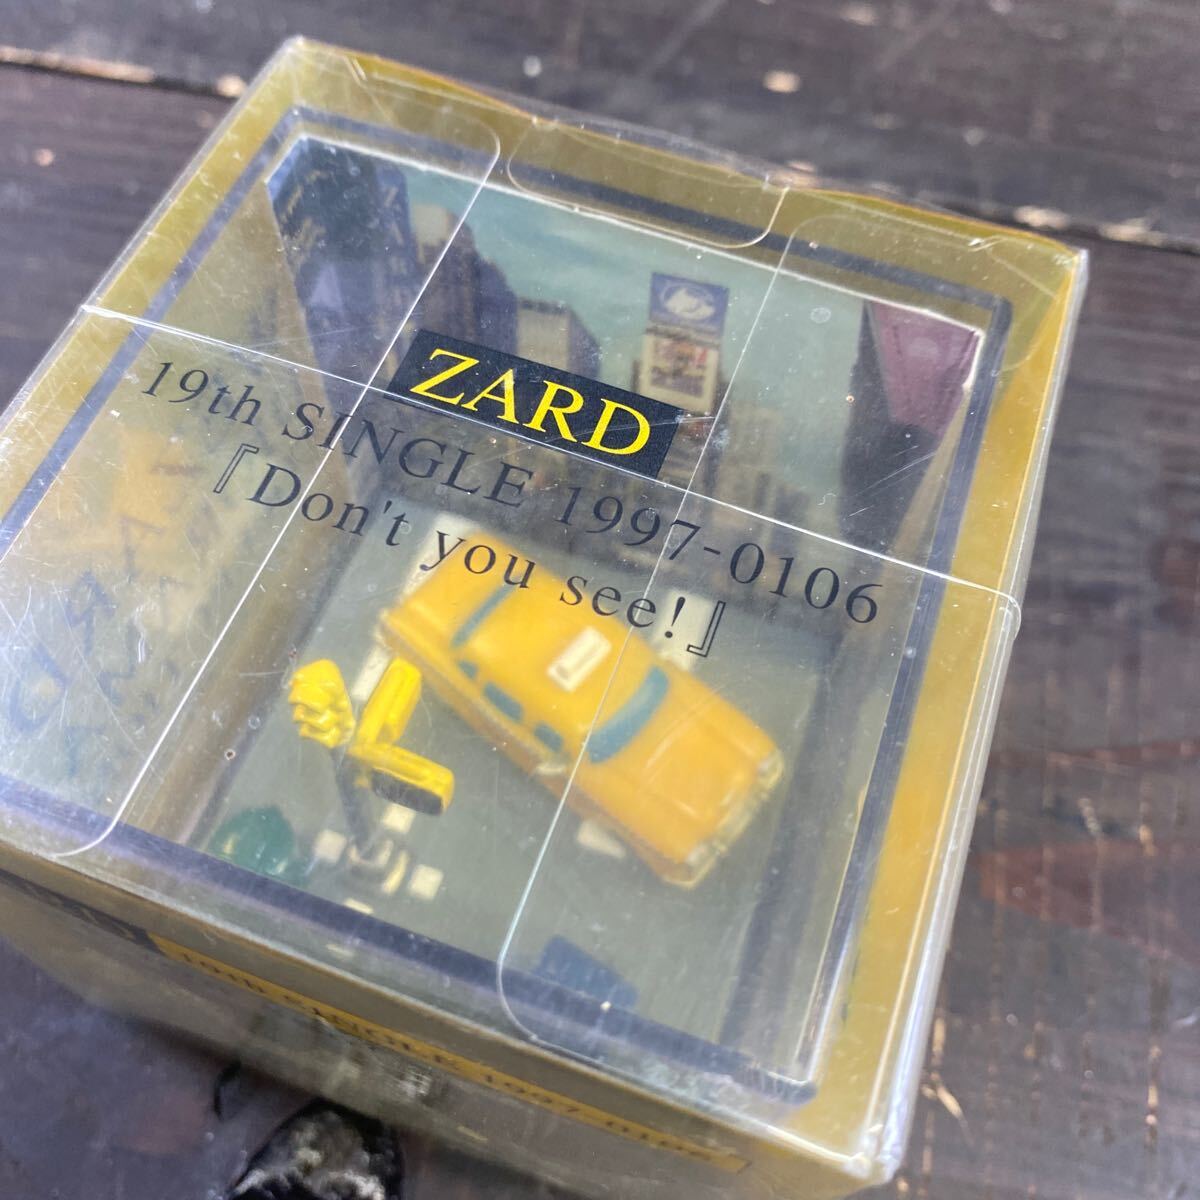 e1206 ZARD ジオラマ 新品 19th SINGLE Don’t you see! 　レア 坂井泉水 グッズ_画像7